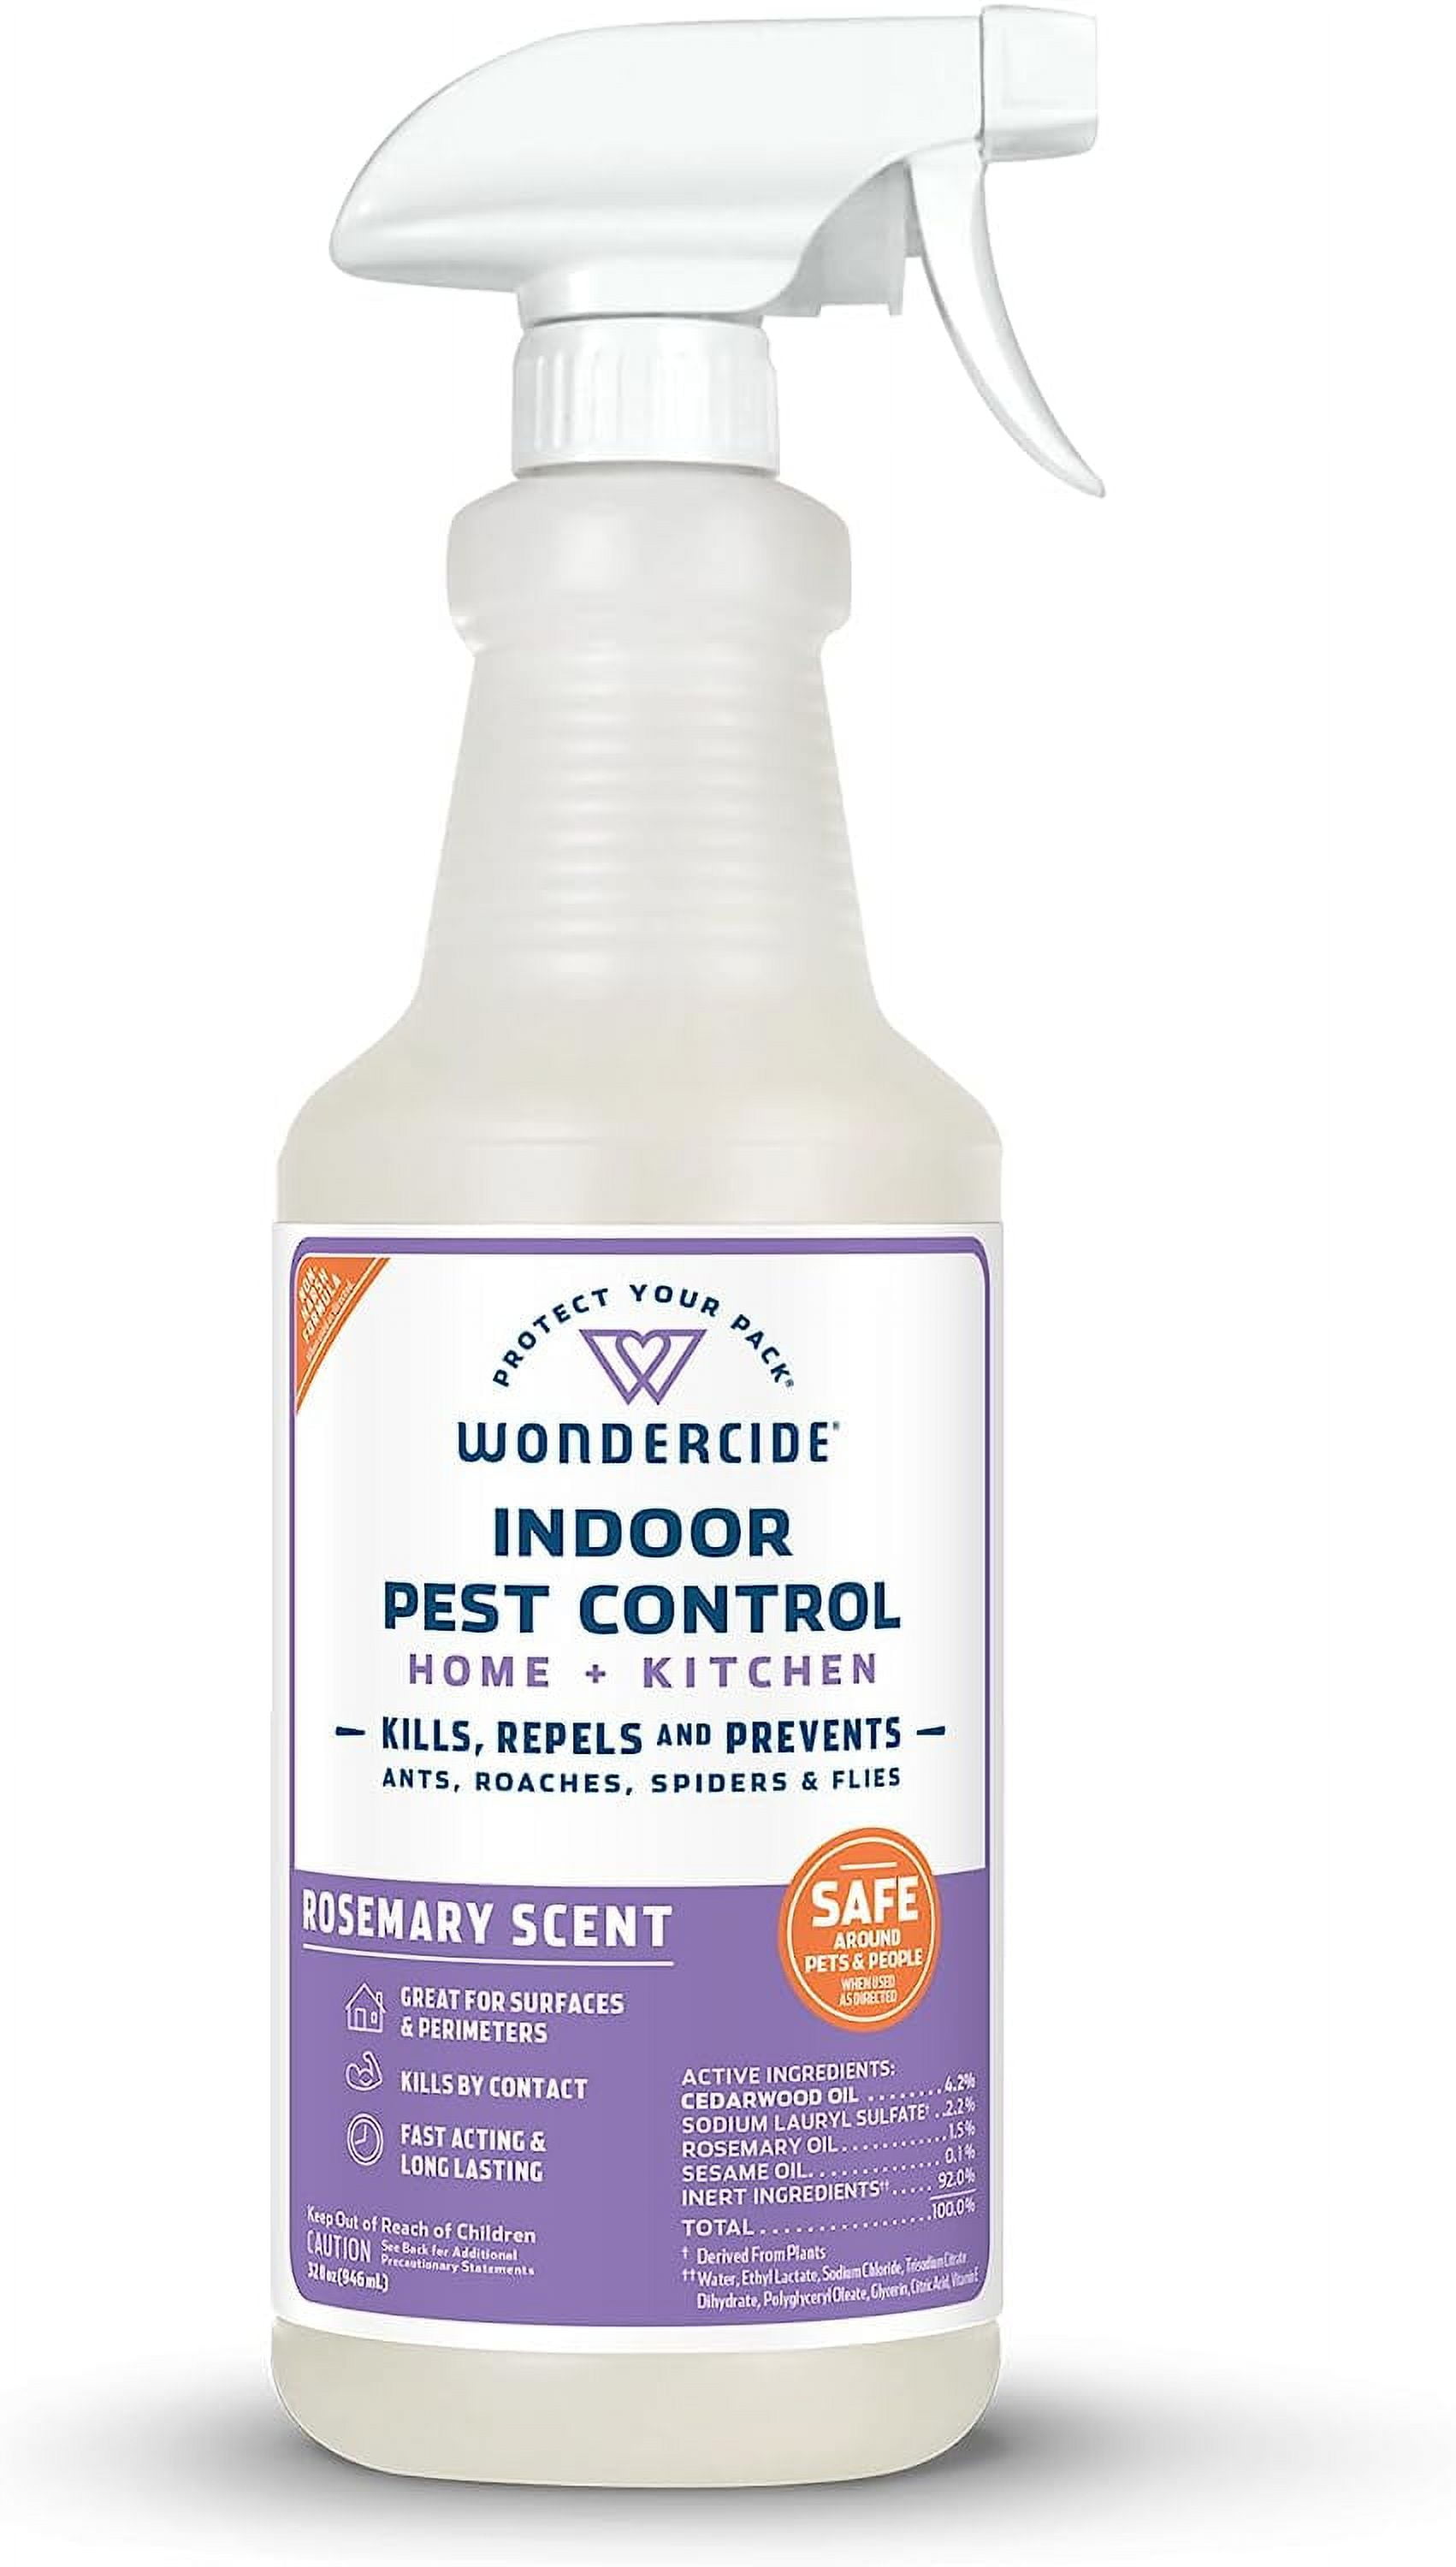 Wondercide - Indoor Pest Control Spray for Home and Kitchen - Ant, Roach,  Spider, Fly, Flea, Bug Killer and Insect Repellent - with Natural Essential  Oils - Pet and Family Safe Rosemary